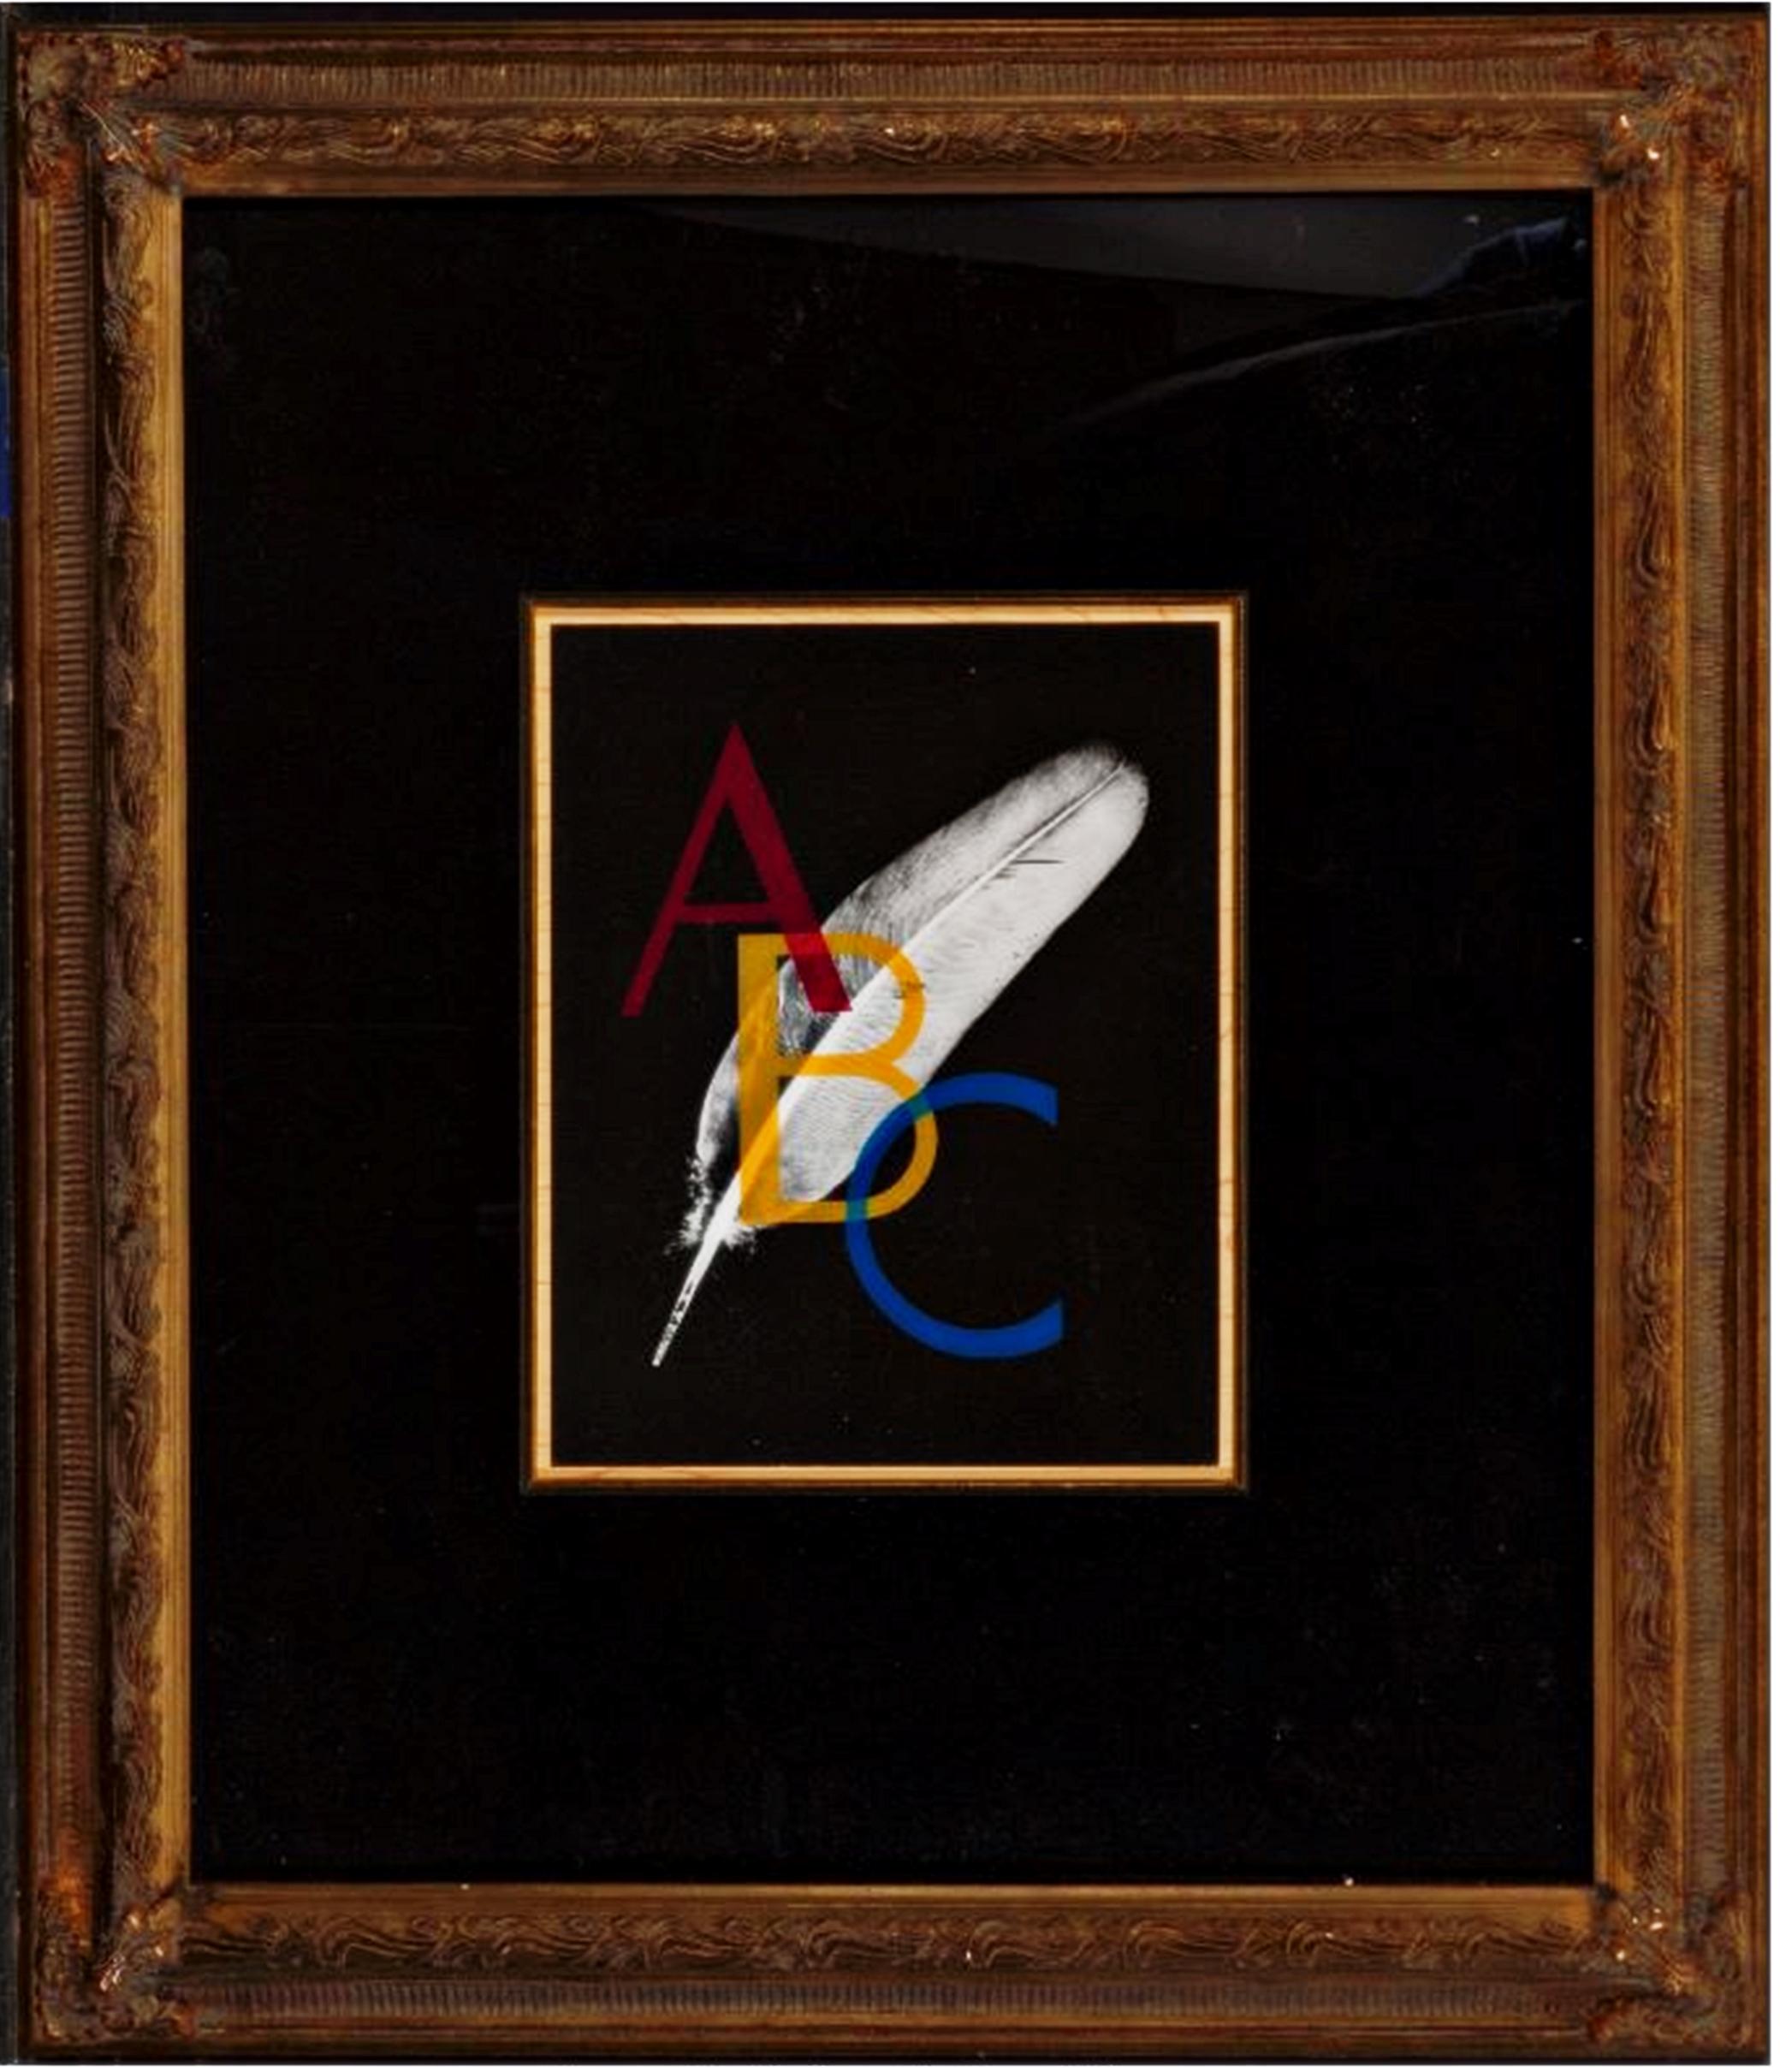 Alphabet Pour Adultes (Alphabet For Adults) Silkscreen, lithograph Signed Framed - Print by Man Ray